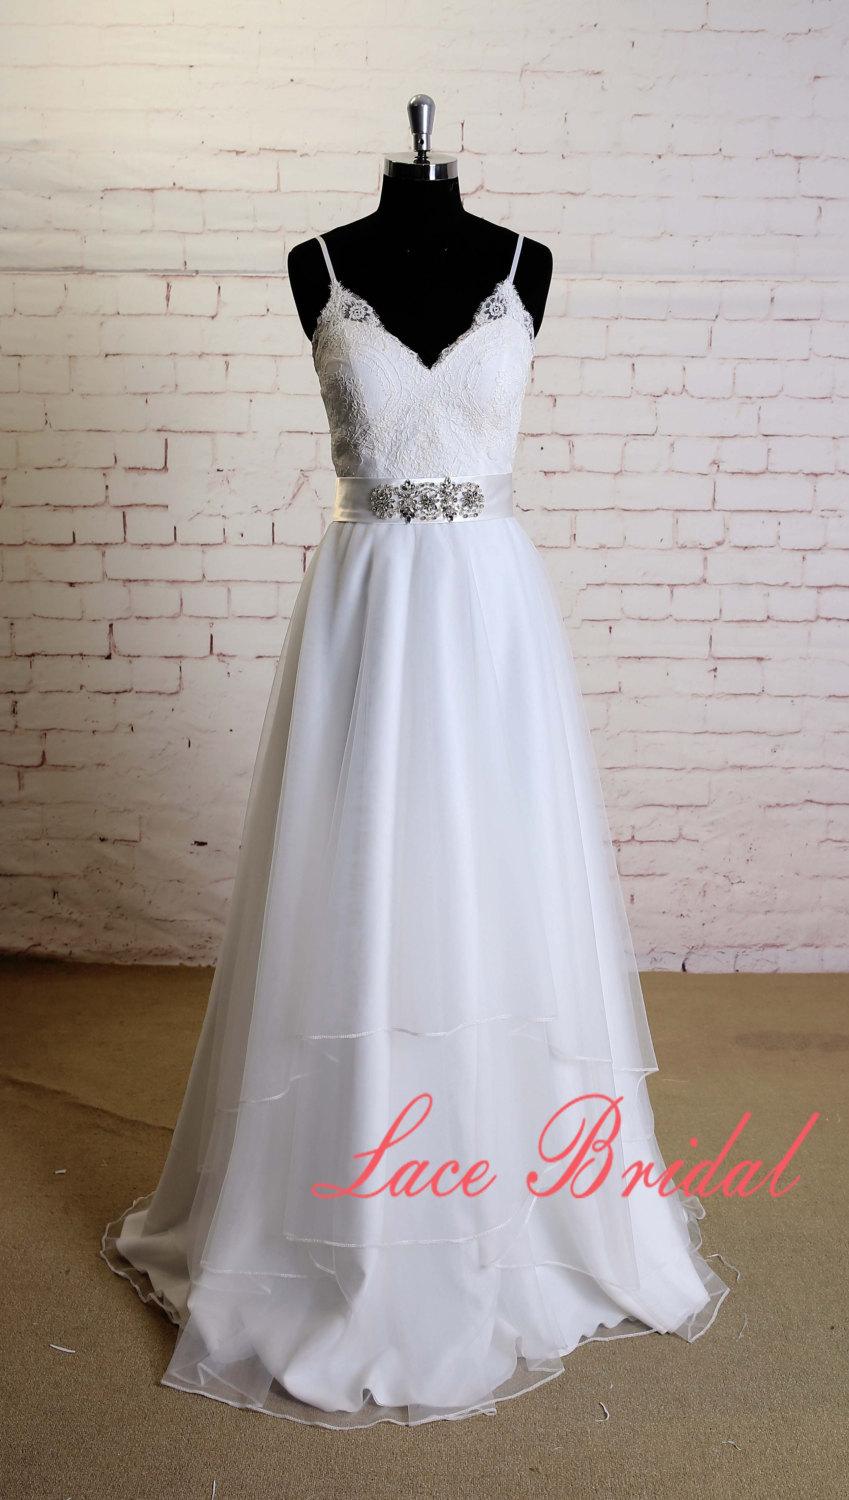 Hochzeit - Soft Layered Tulle Skirt Wedding Dress with Spaghetti Straps Classic Lace Bodice Bridal Gown with Beading Sash